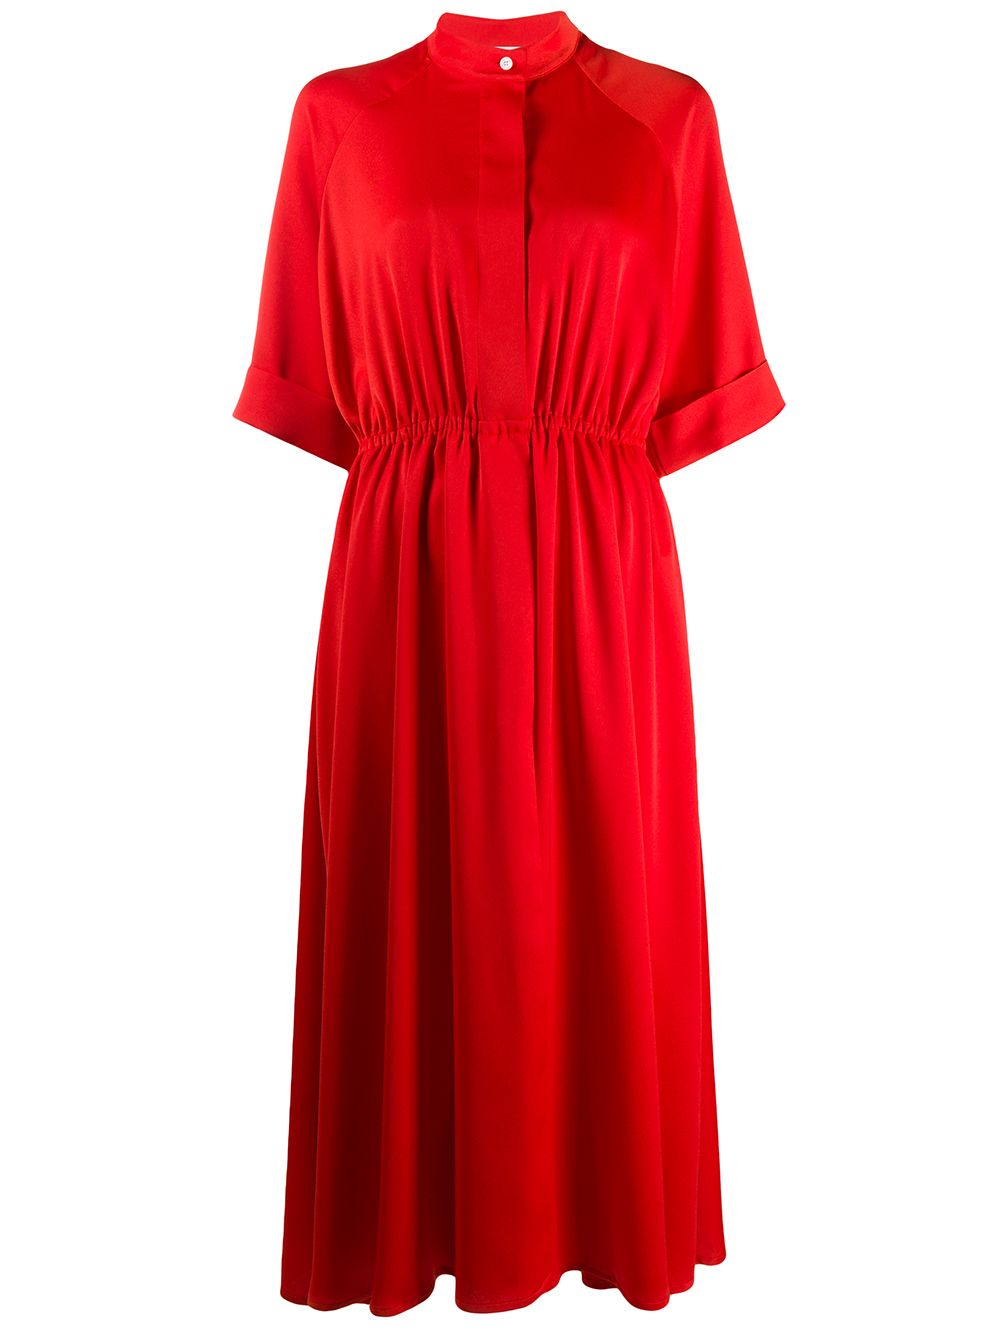 Rent the Mulberry Red Dress for any occasion!